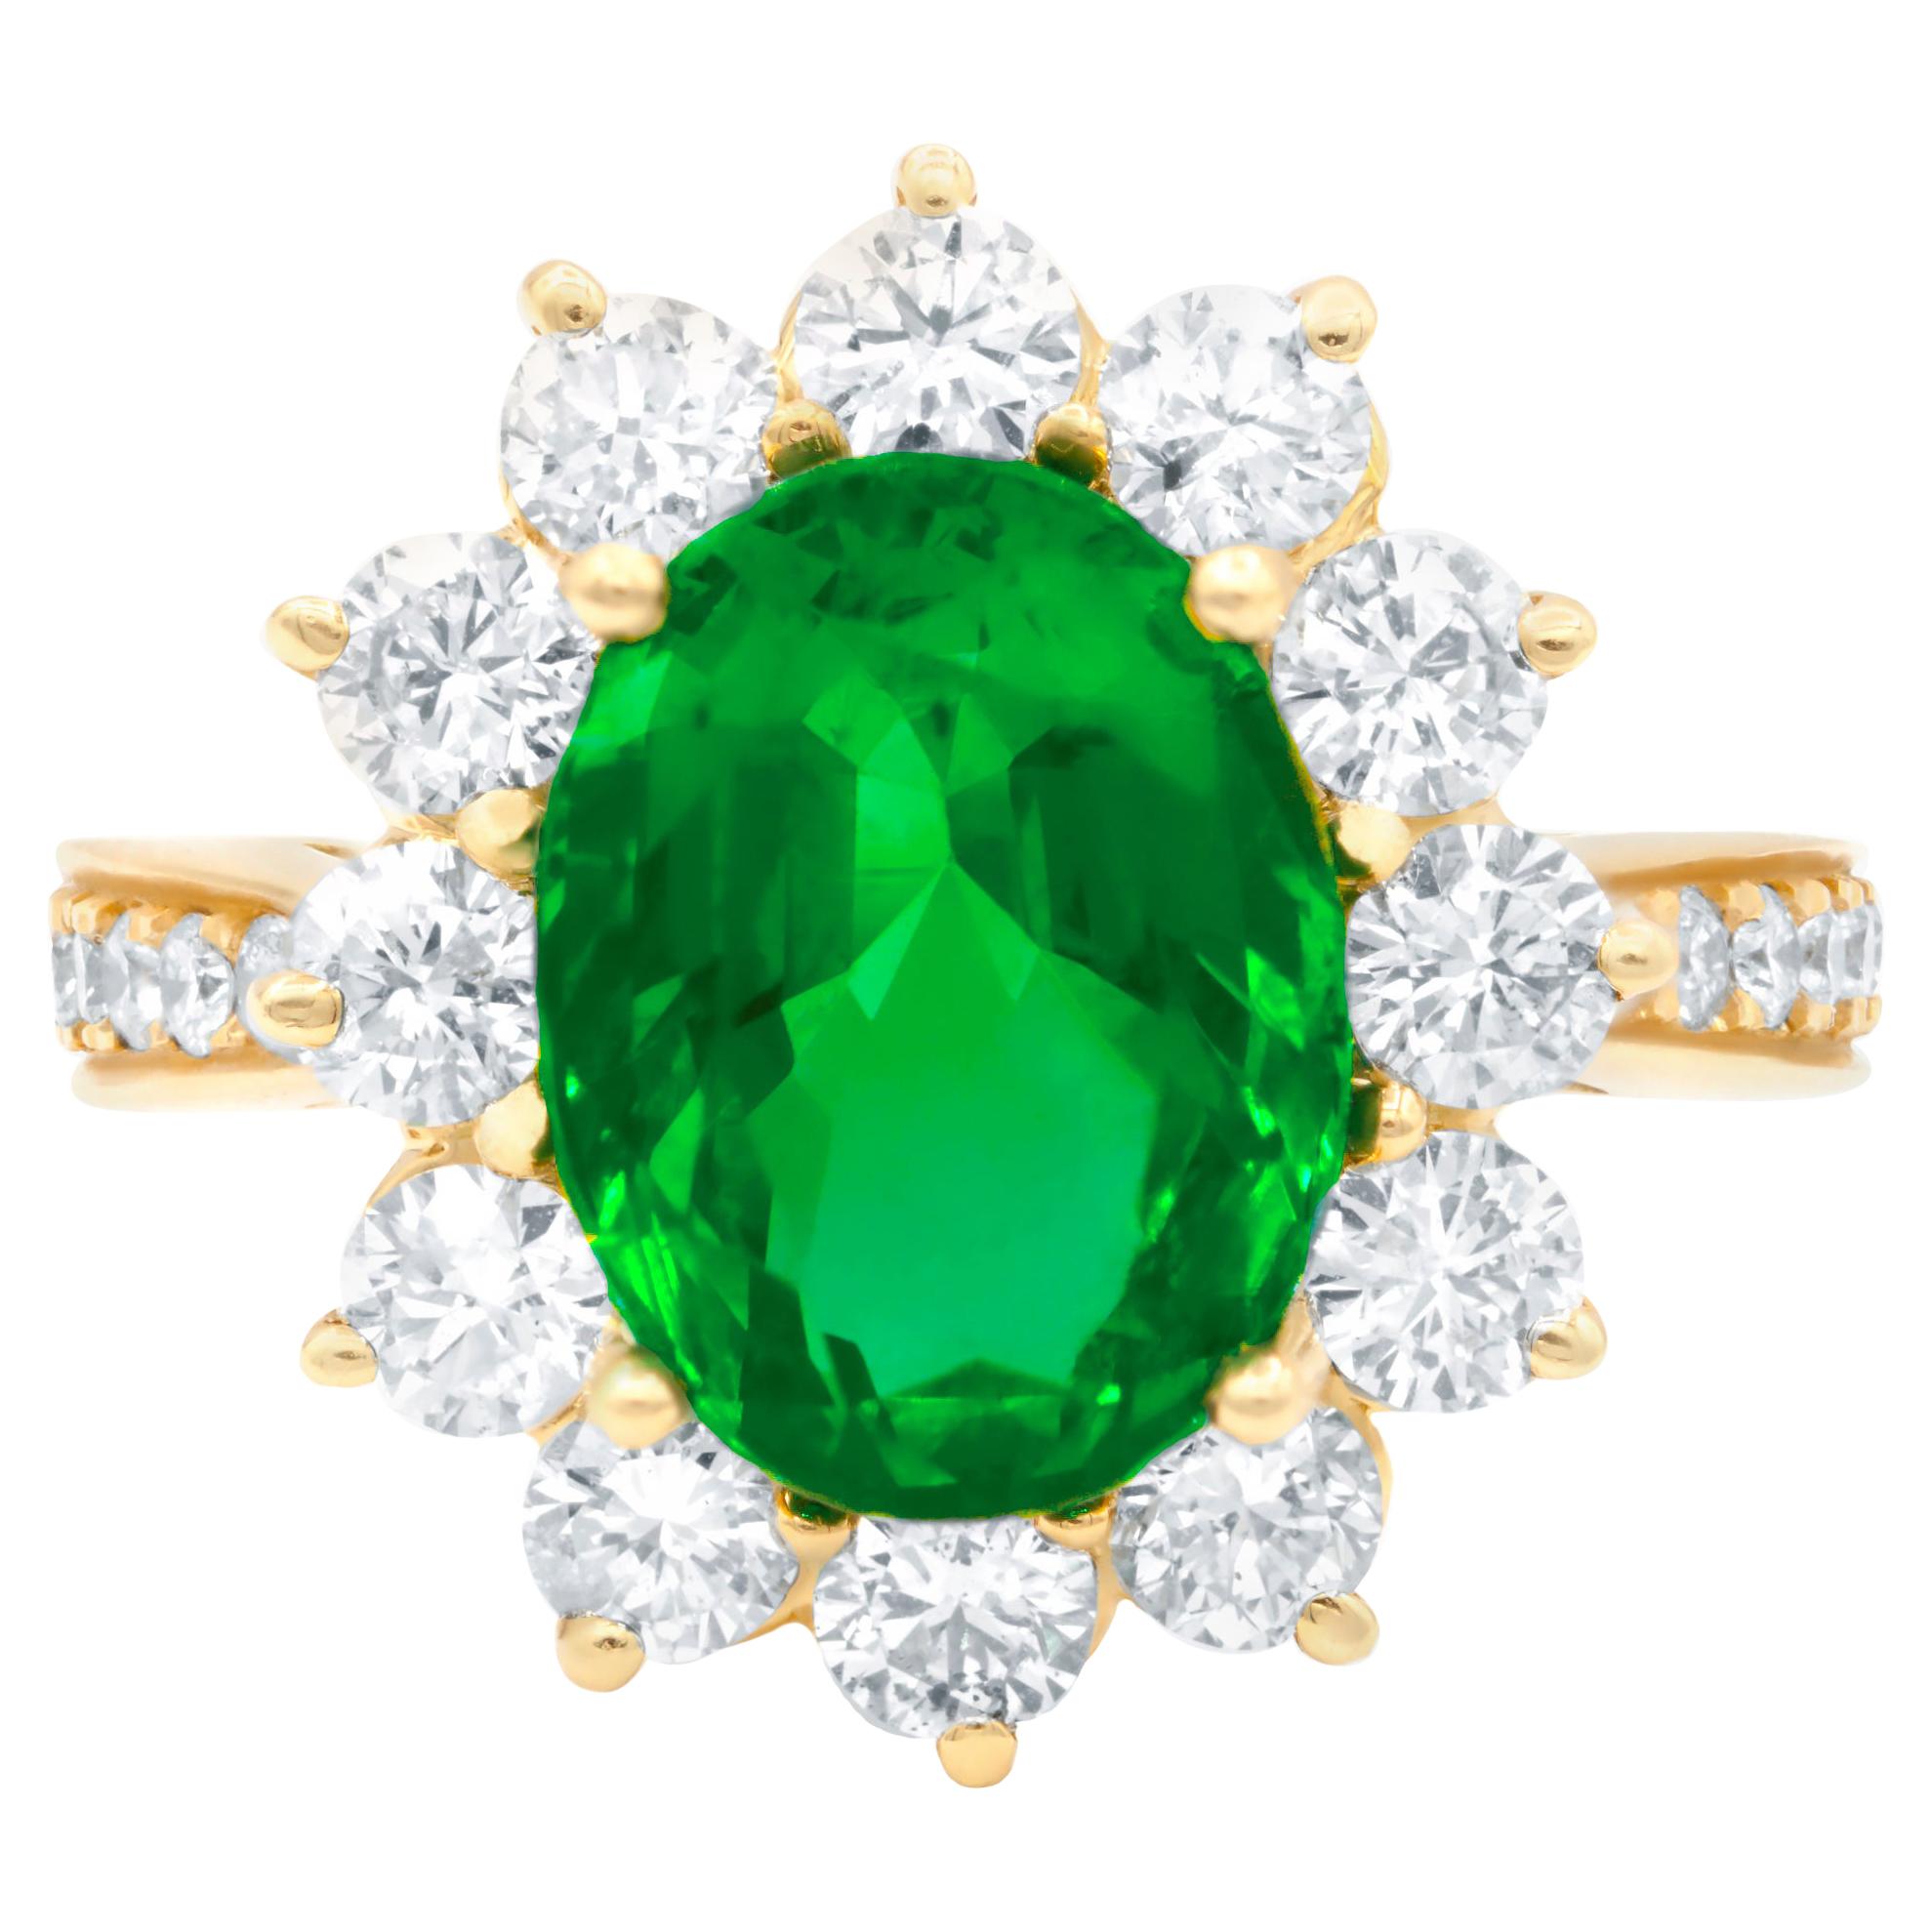 Flower Design Emerald Diamond Ring with 18kt Yellow Gold